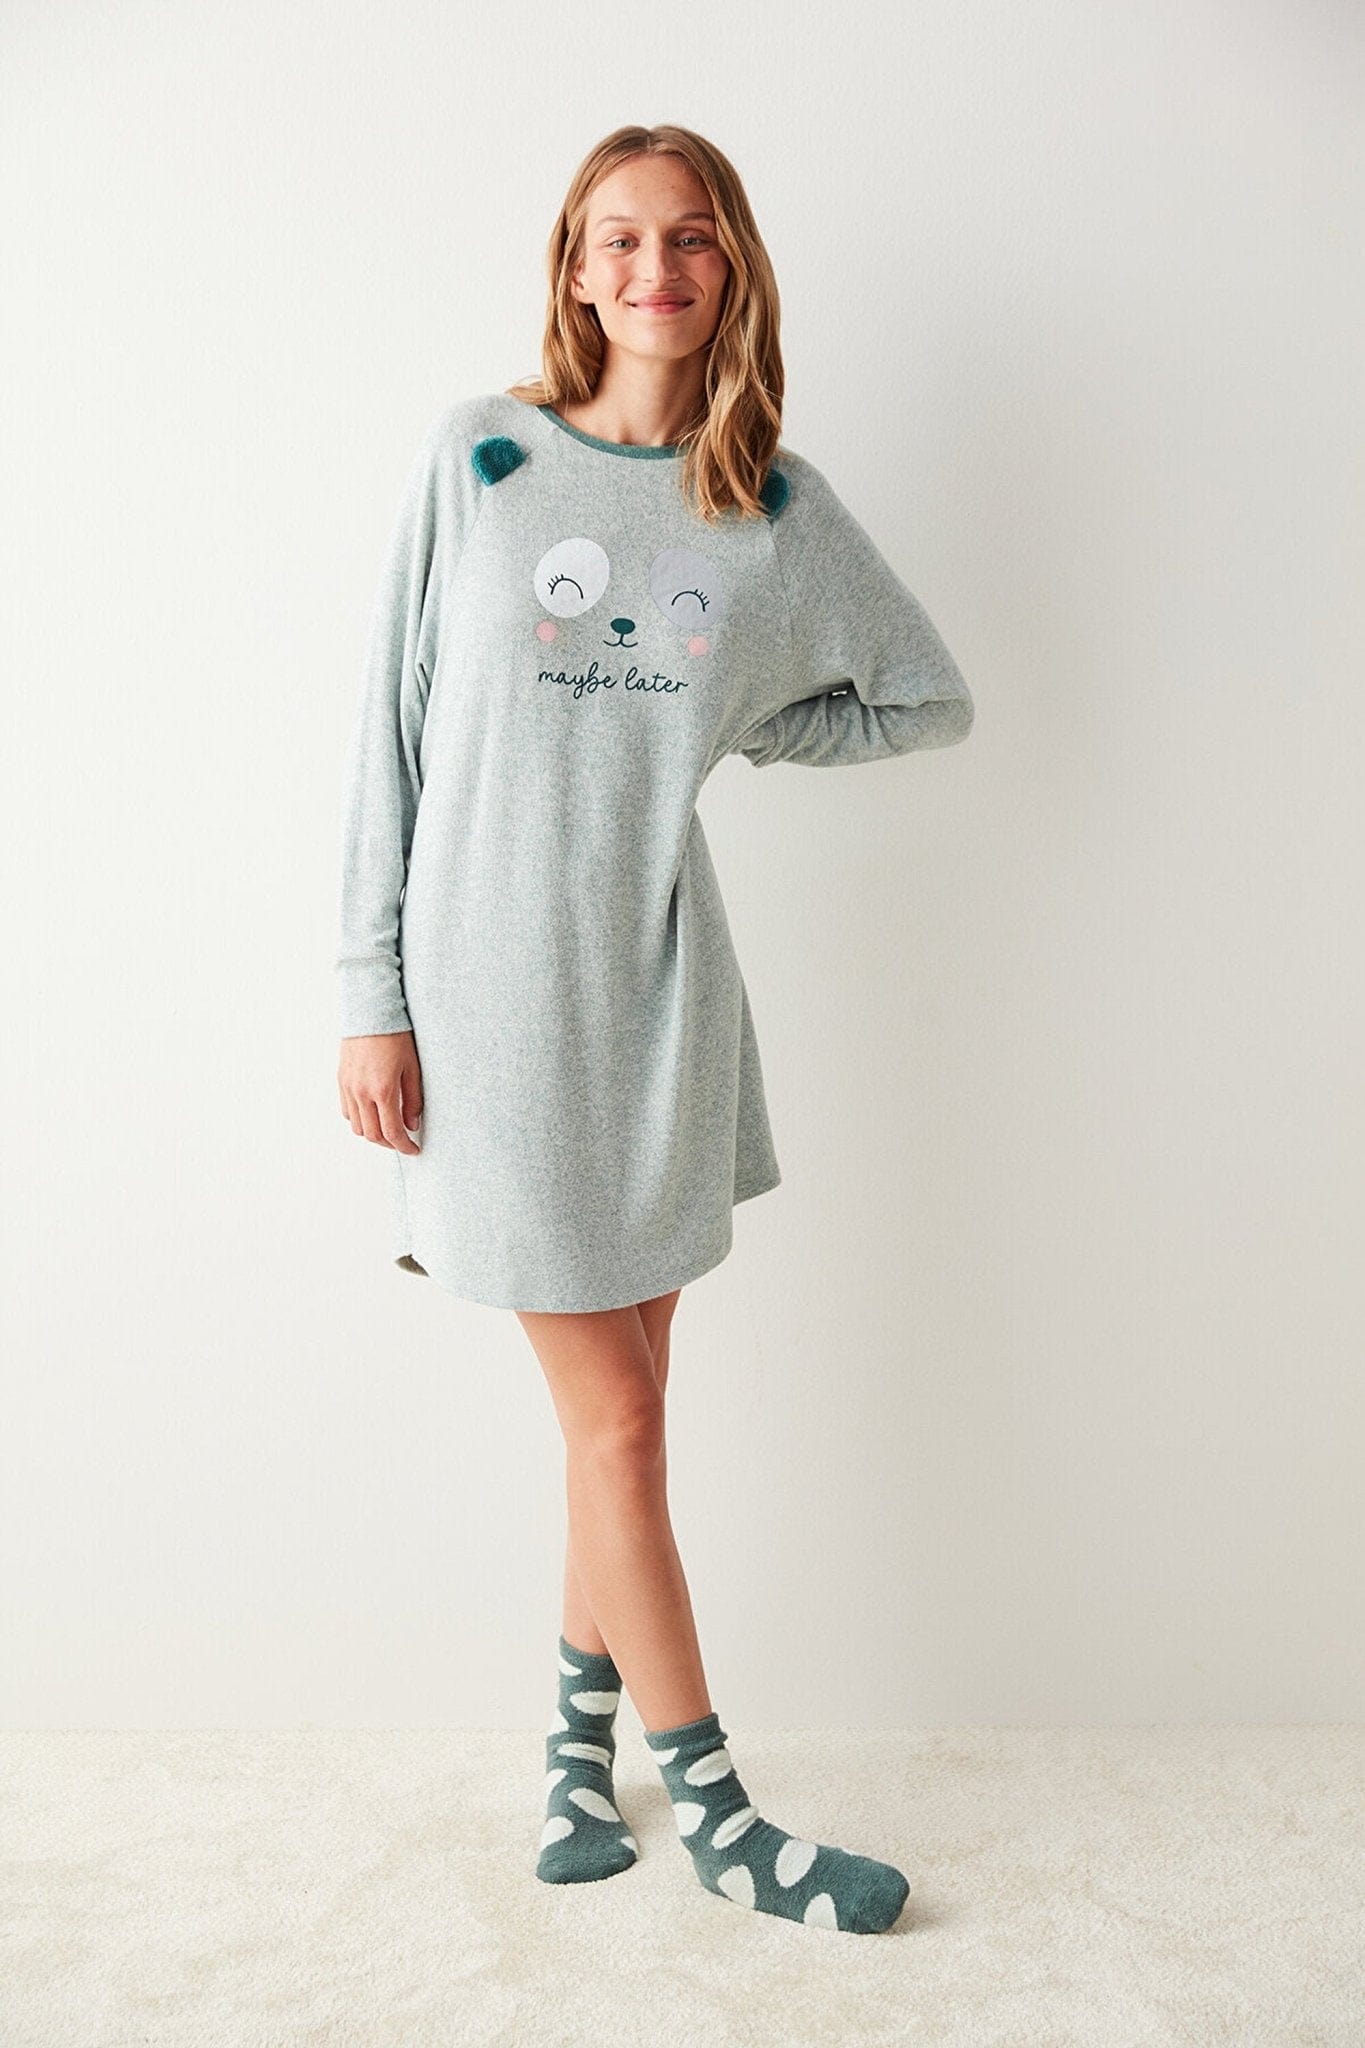 Maybe Later Slogan Printed Long Sleeve Thermal Dress FLEXISB